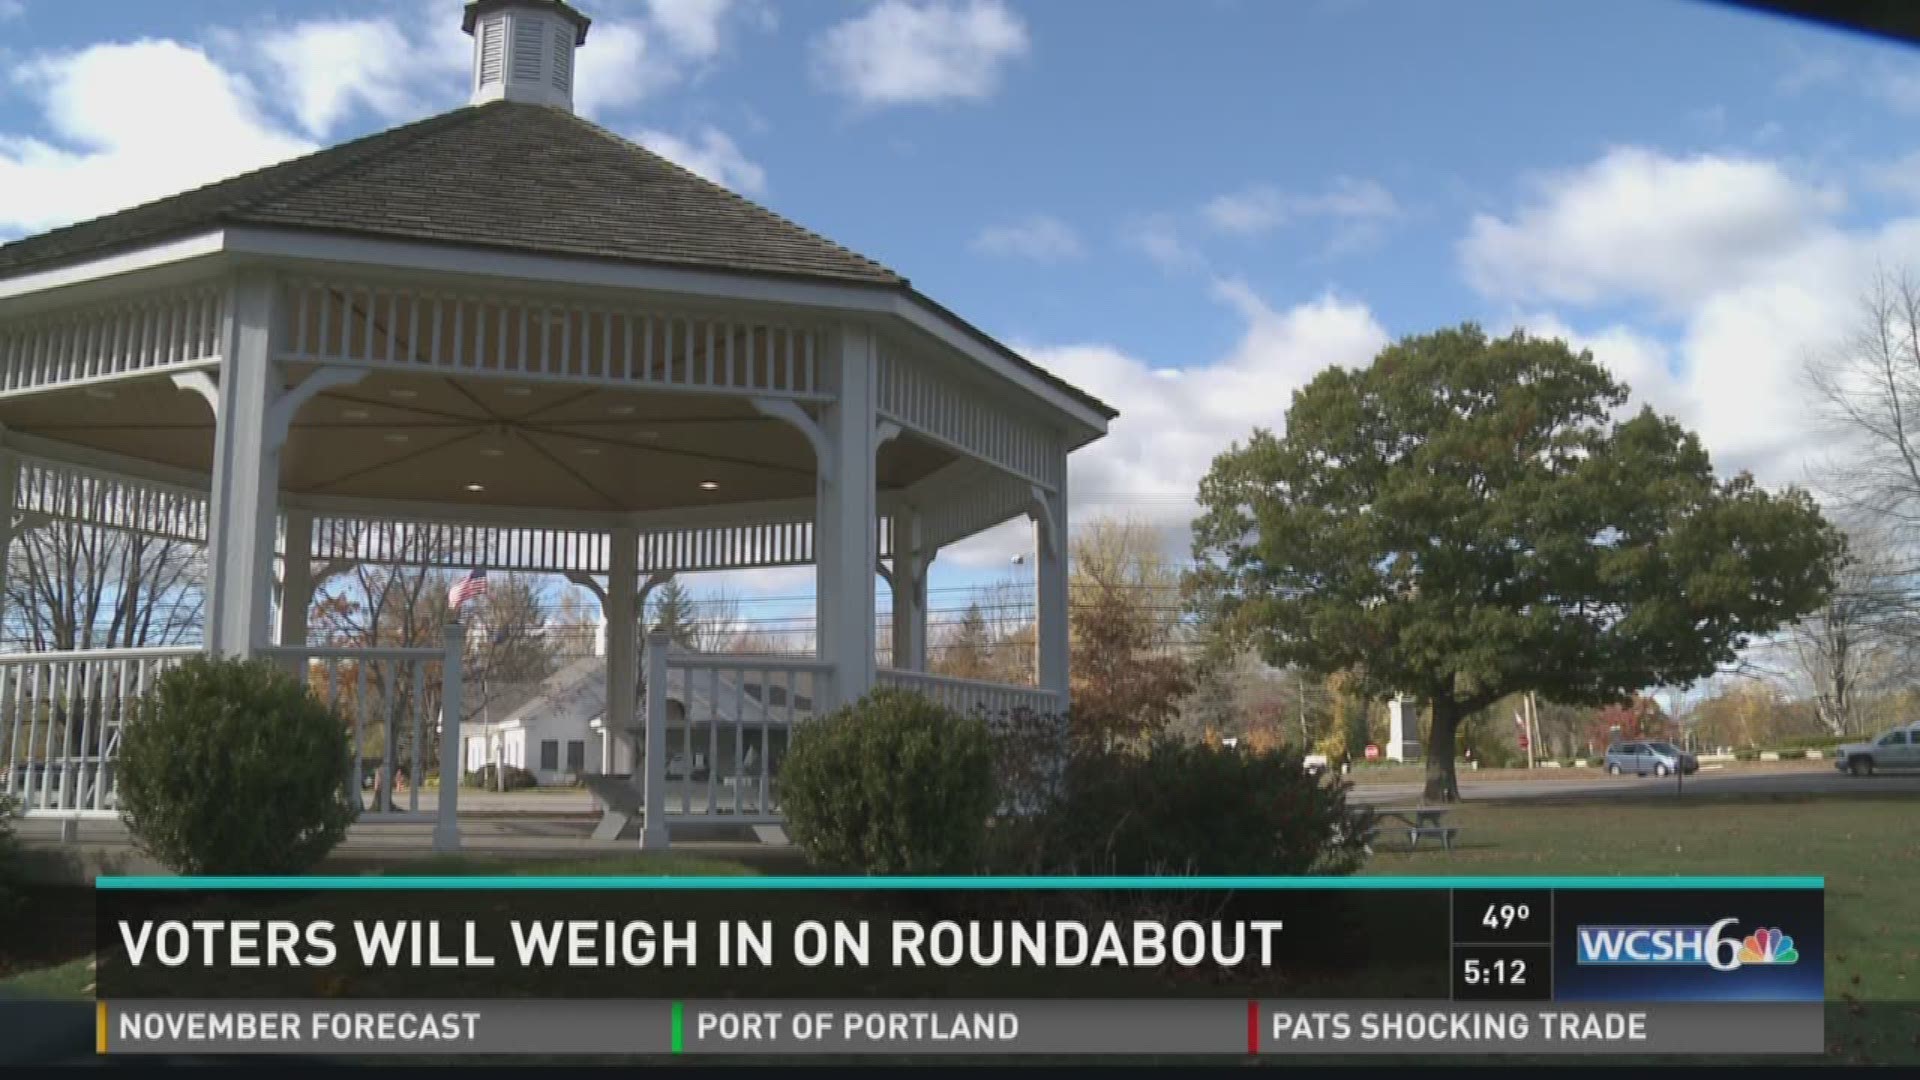 Voters will weigh in on roundabout